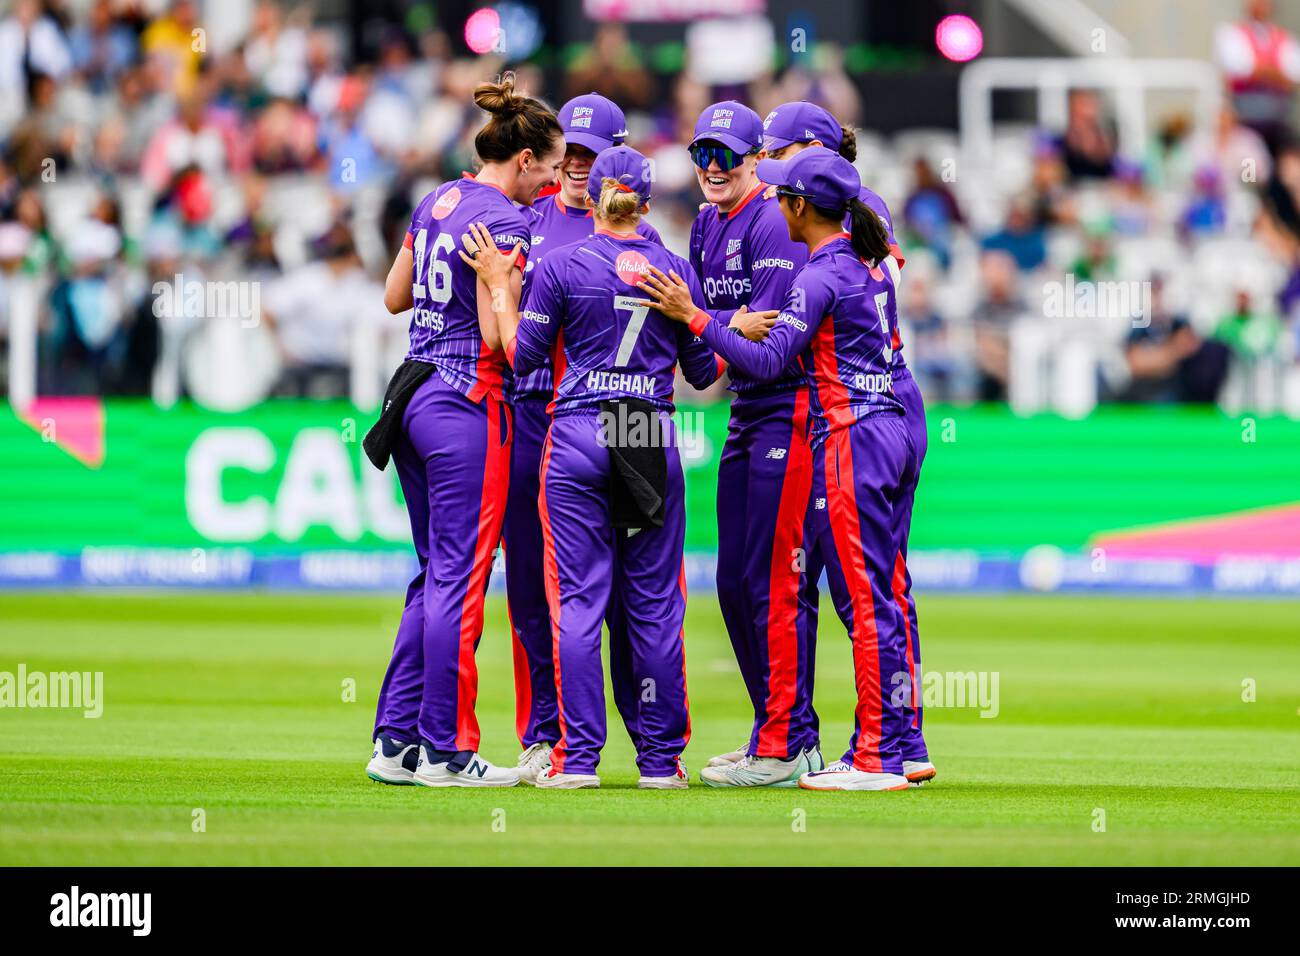 LONDON, UNITED KINGDOM. 27 August, 23.  during The Final - Southern Brave Women vs Northern Supercharges Women at The Lord's Cricket Ground on Sunday, August 27, 2023 in LONDON ENGLAND.  Credit: Taka Wu/Alamy Live News Stock Photo